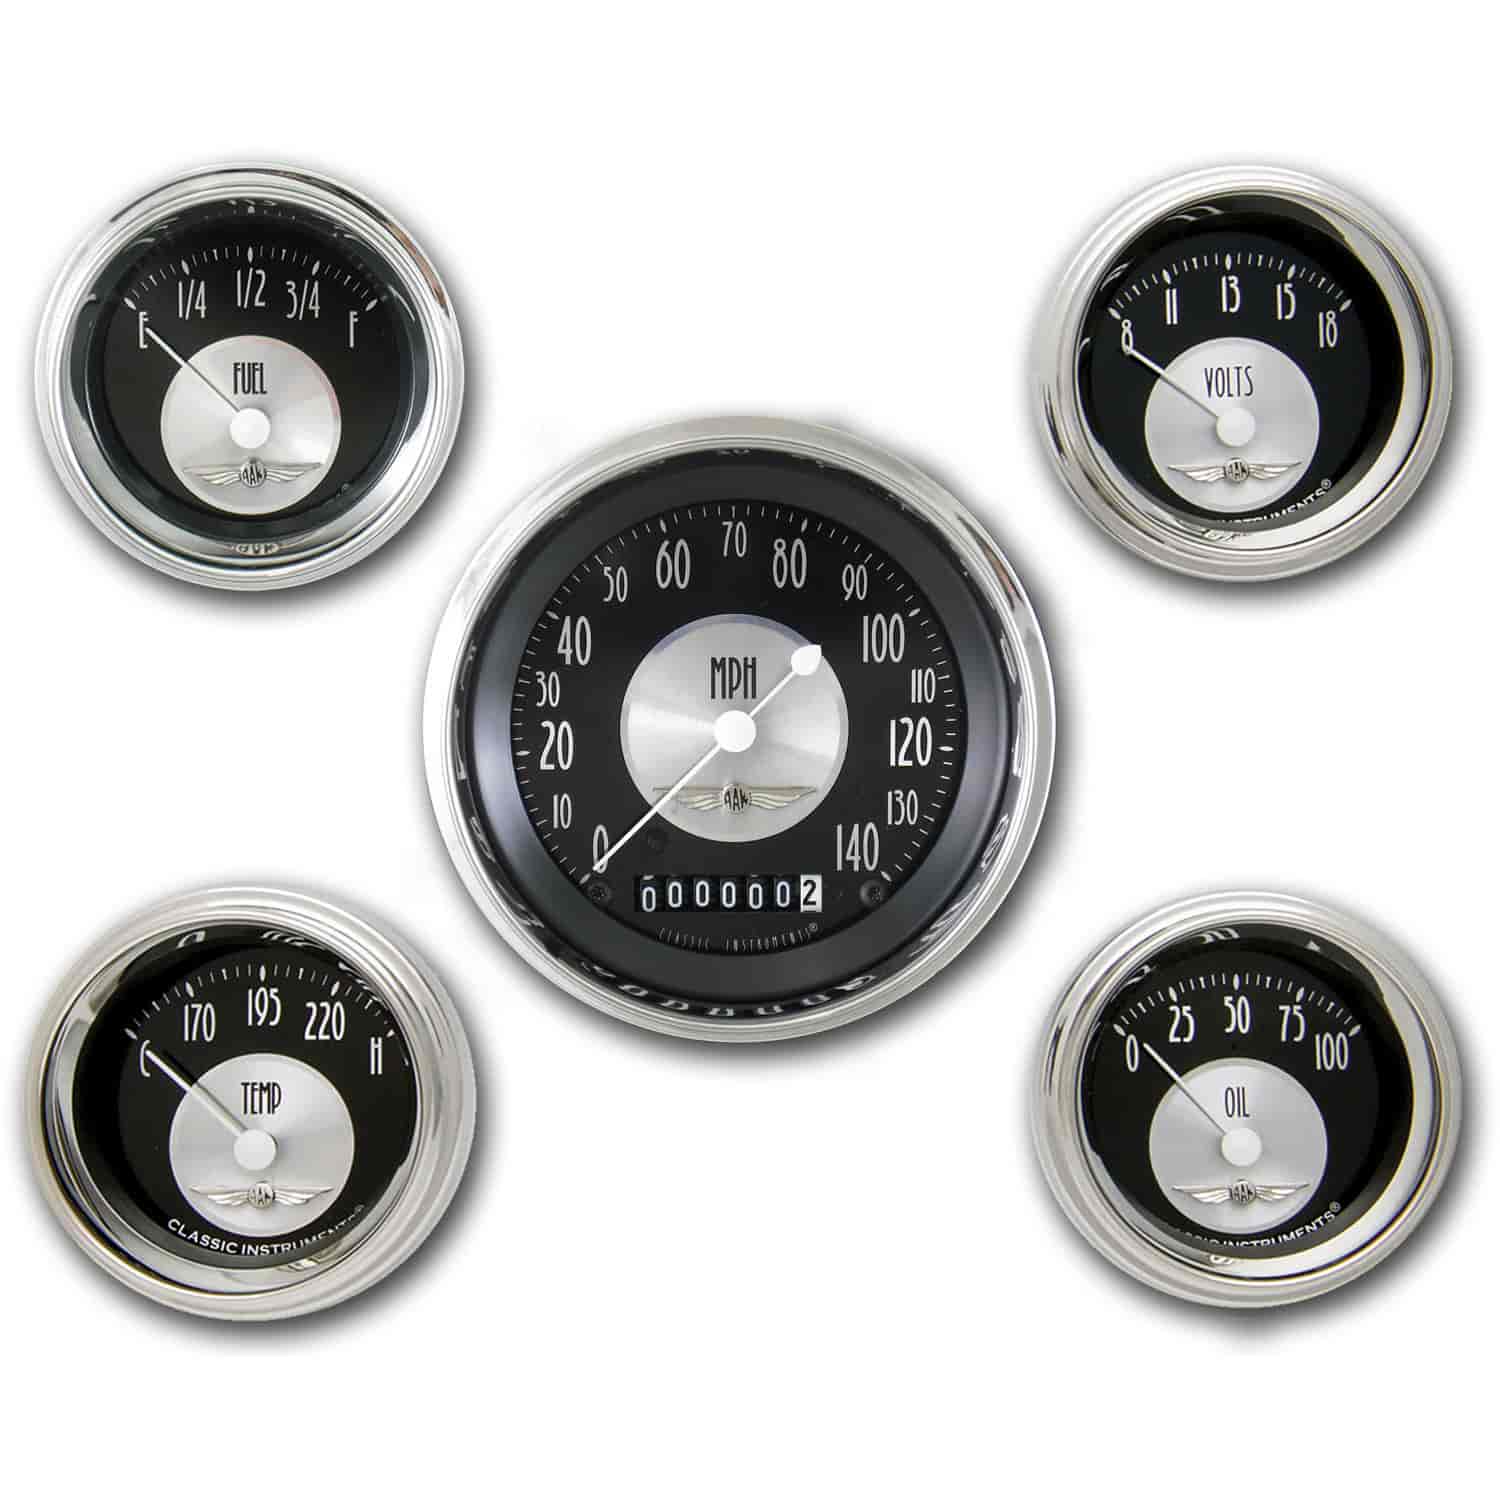 All American Tradition 5-Gauge Set 3-3/8" Electrical Speedometer (140 mph)